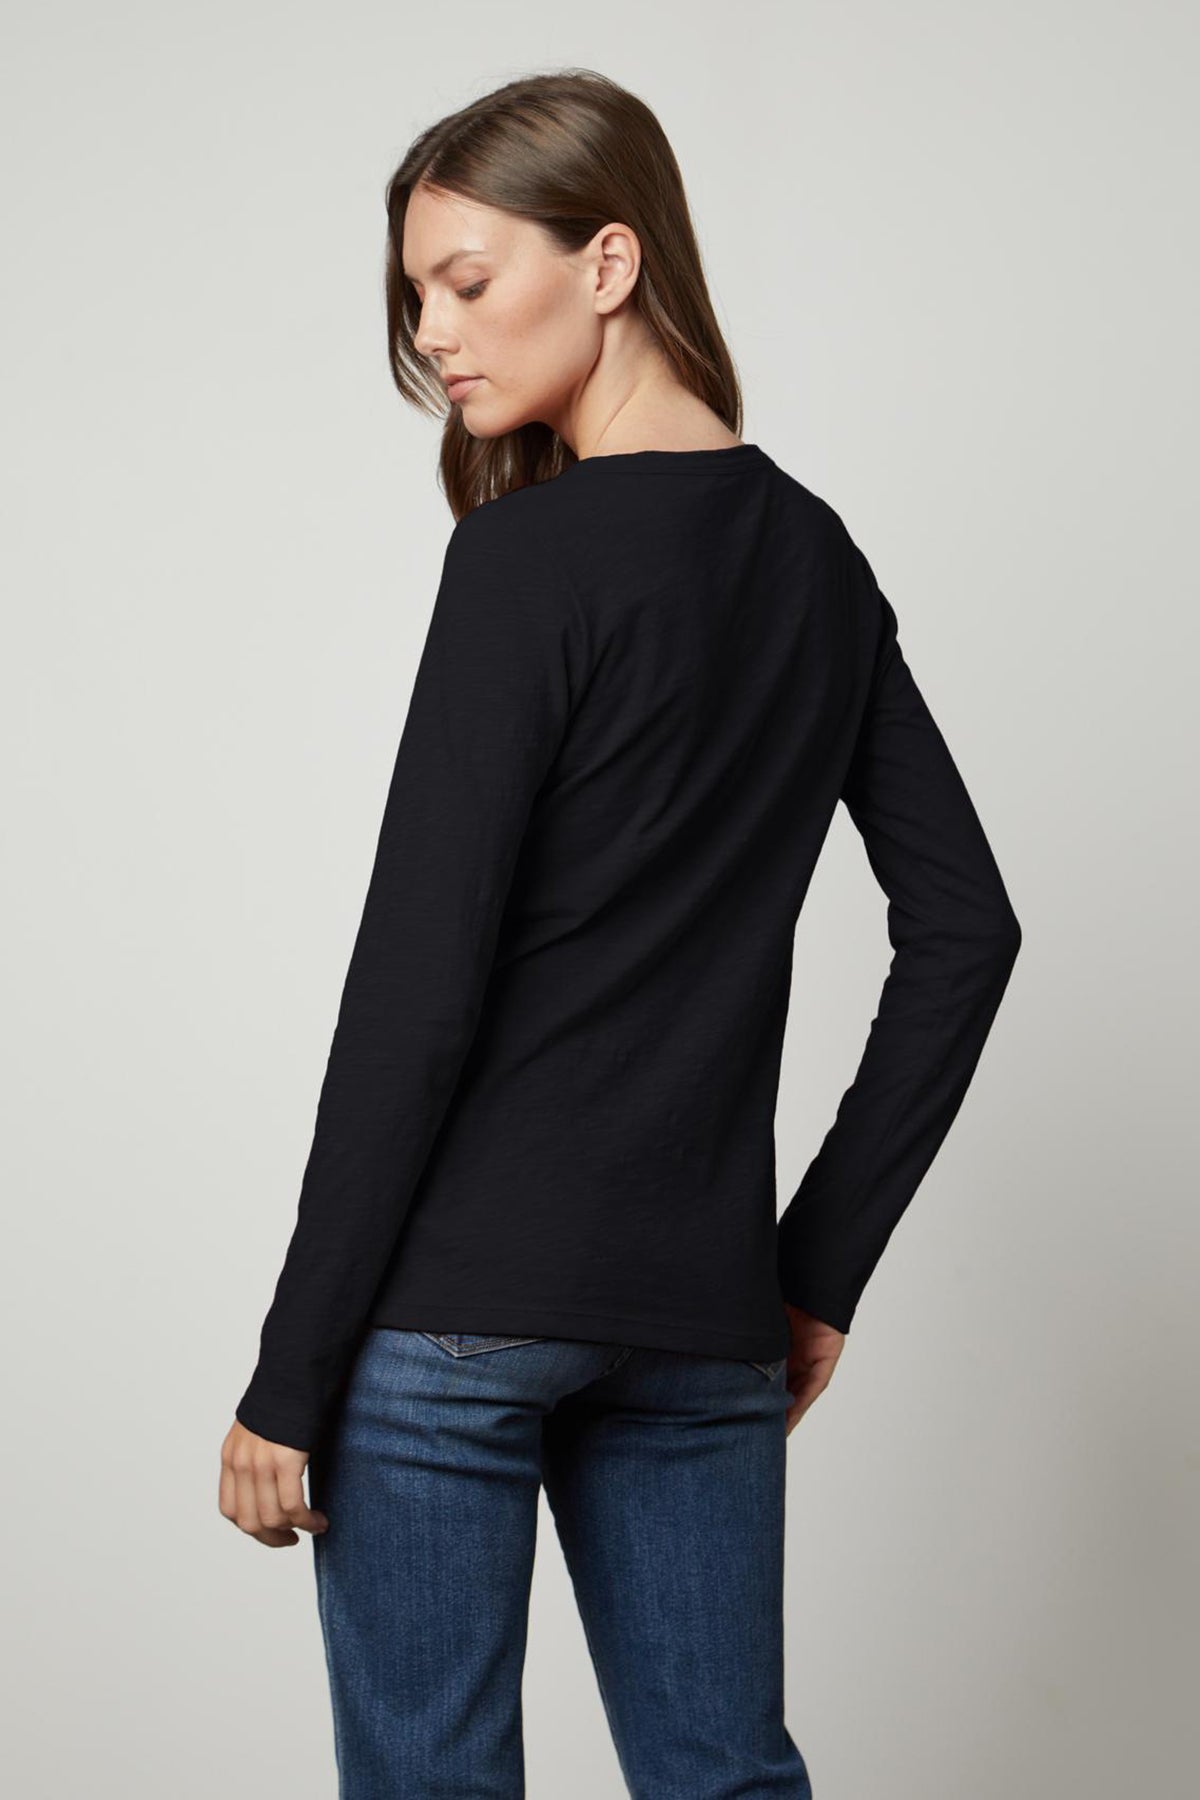 The back view of a woman wearing jeans and a black LIZZIE ORIGINAL SLUB LONG SLEEVE TEE made by Velvet by Graham & Spencer, made of cotton.-35629837615297